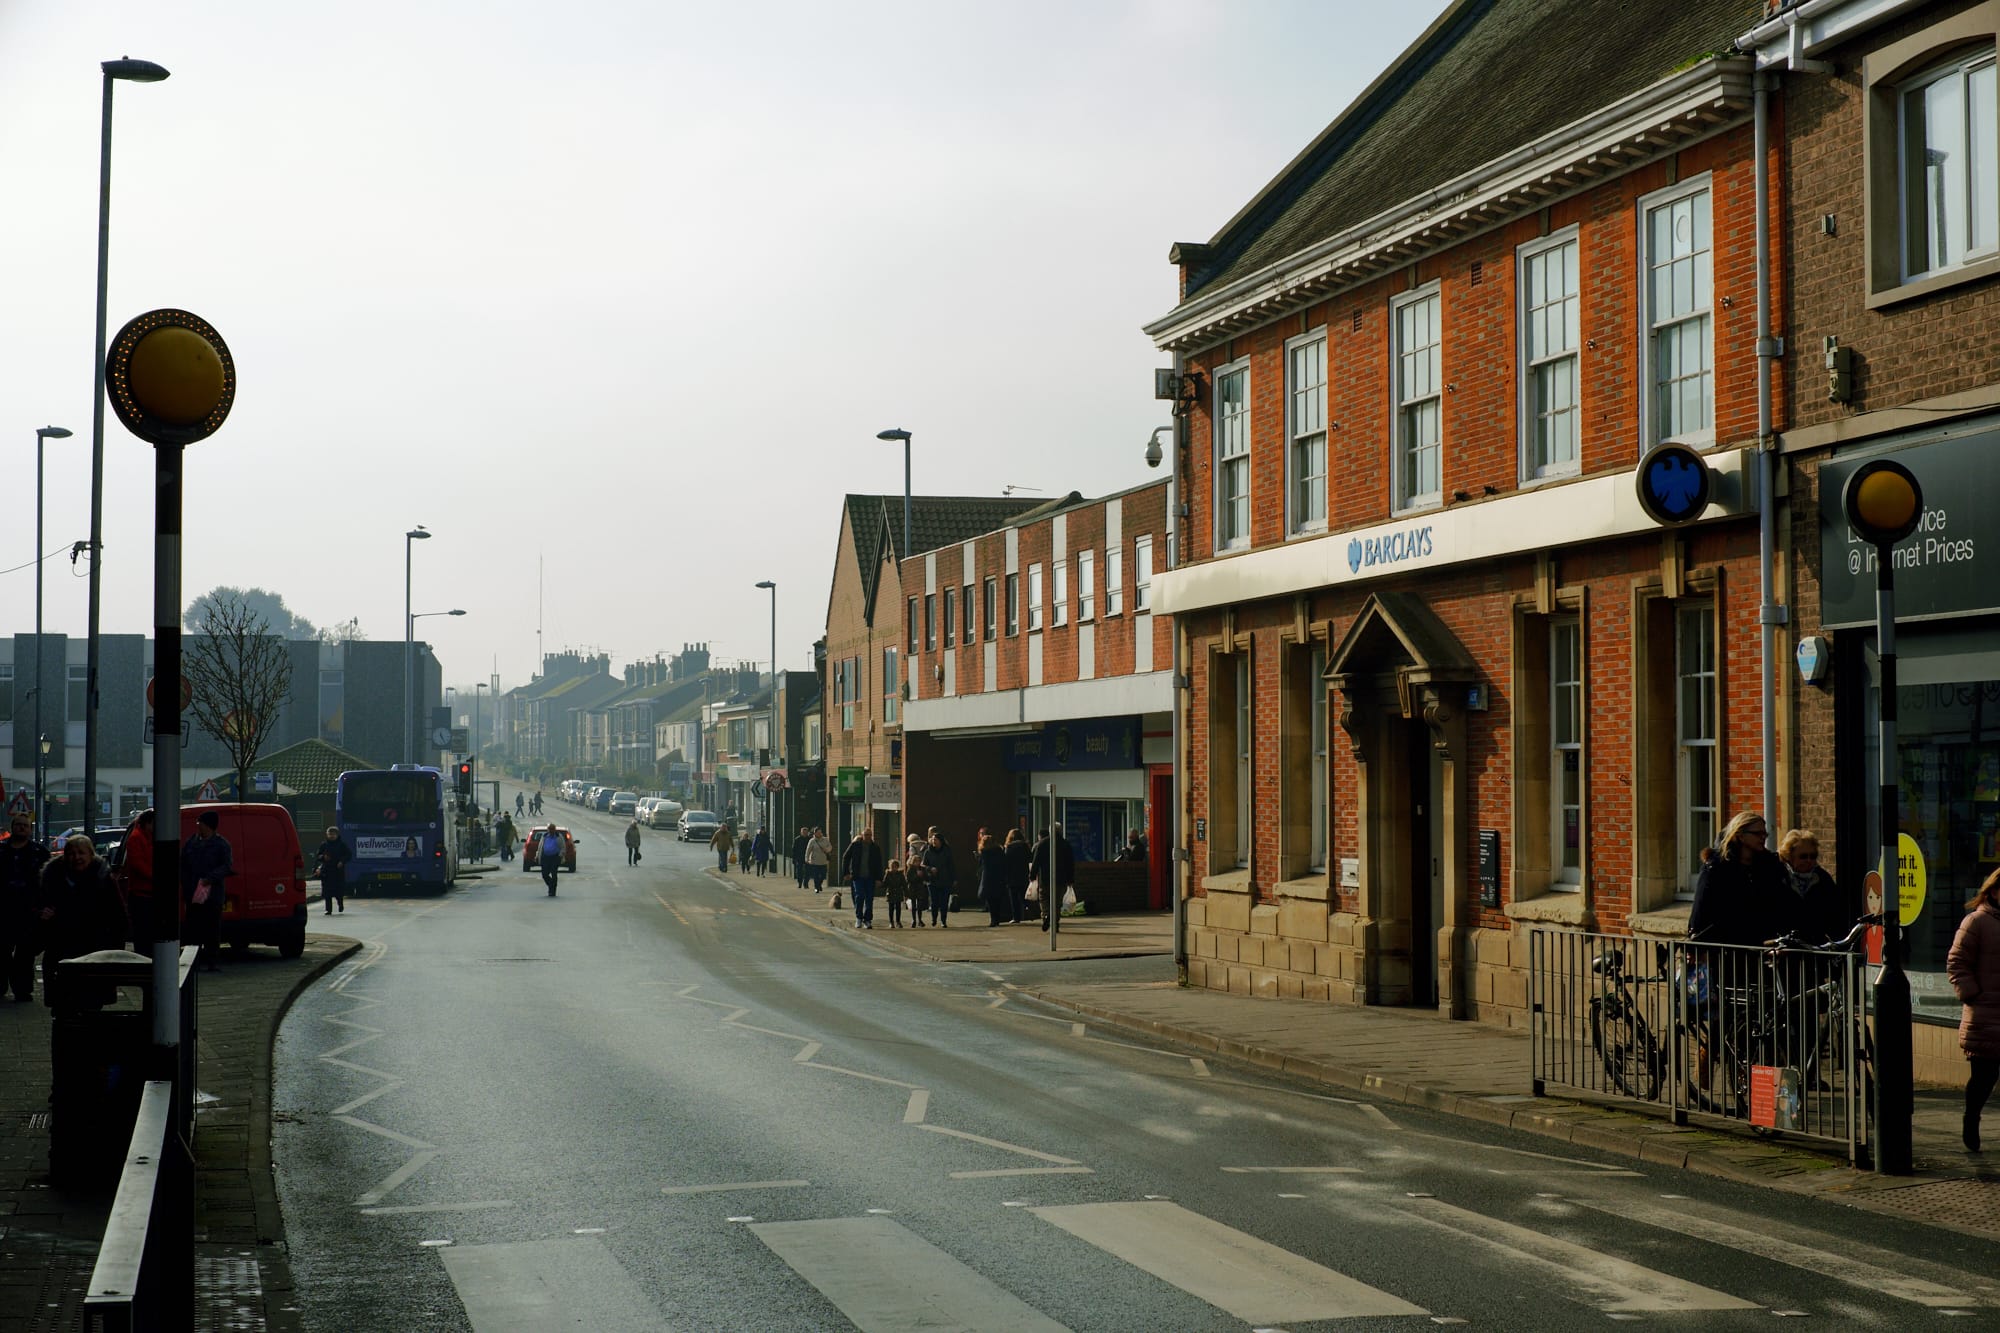 view south along Lowestoft Road from the town centre